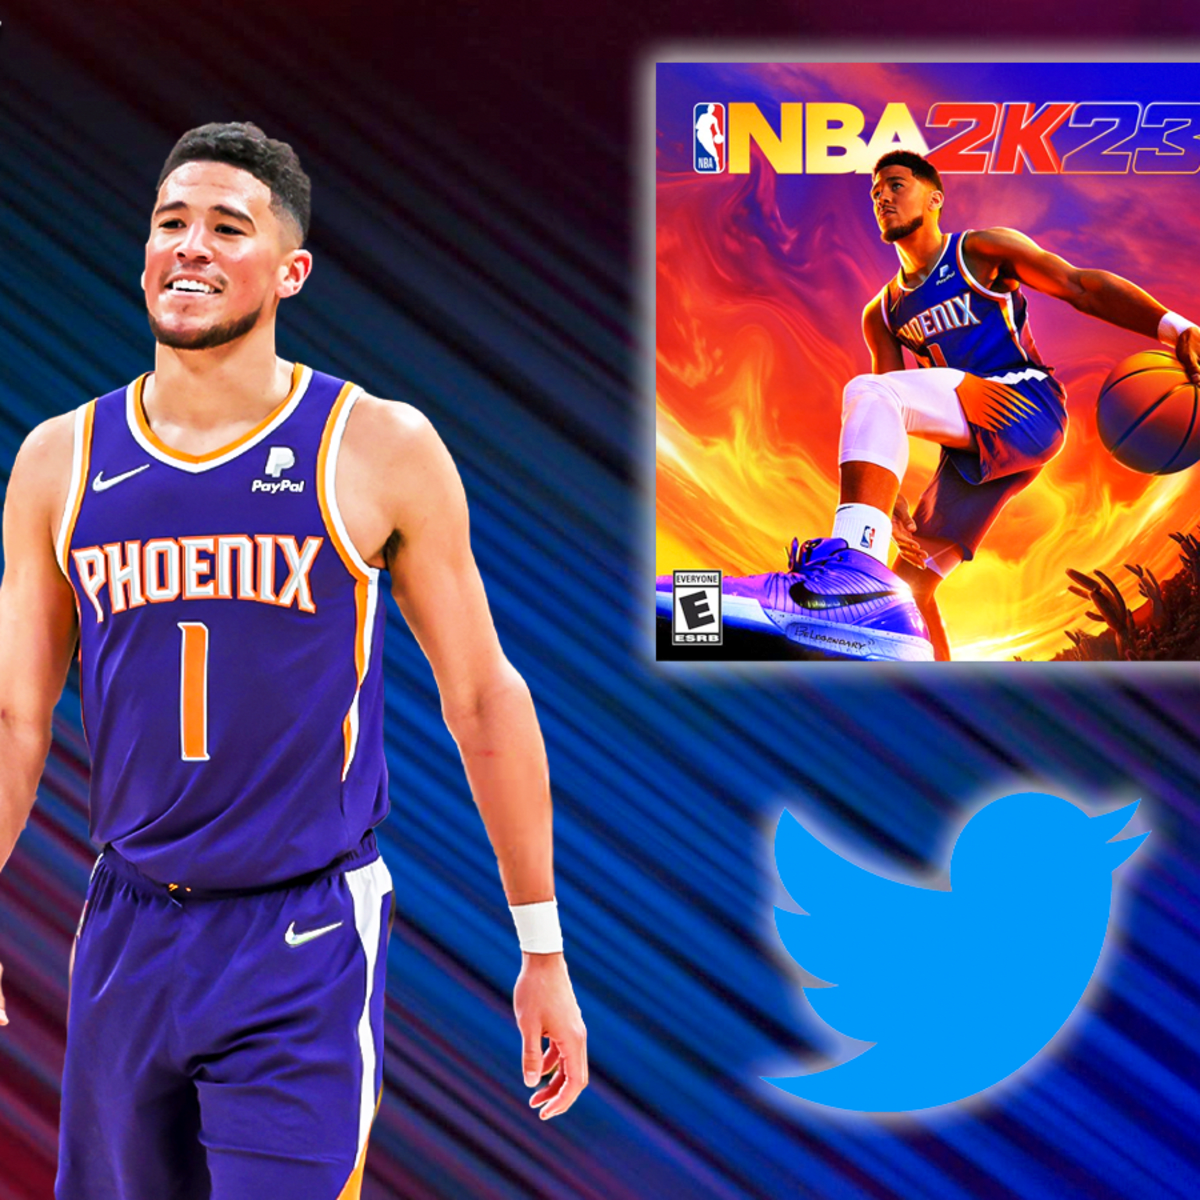 Devin Booker reacts to being on the cover of NBA 2K23